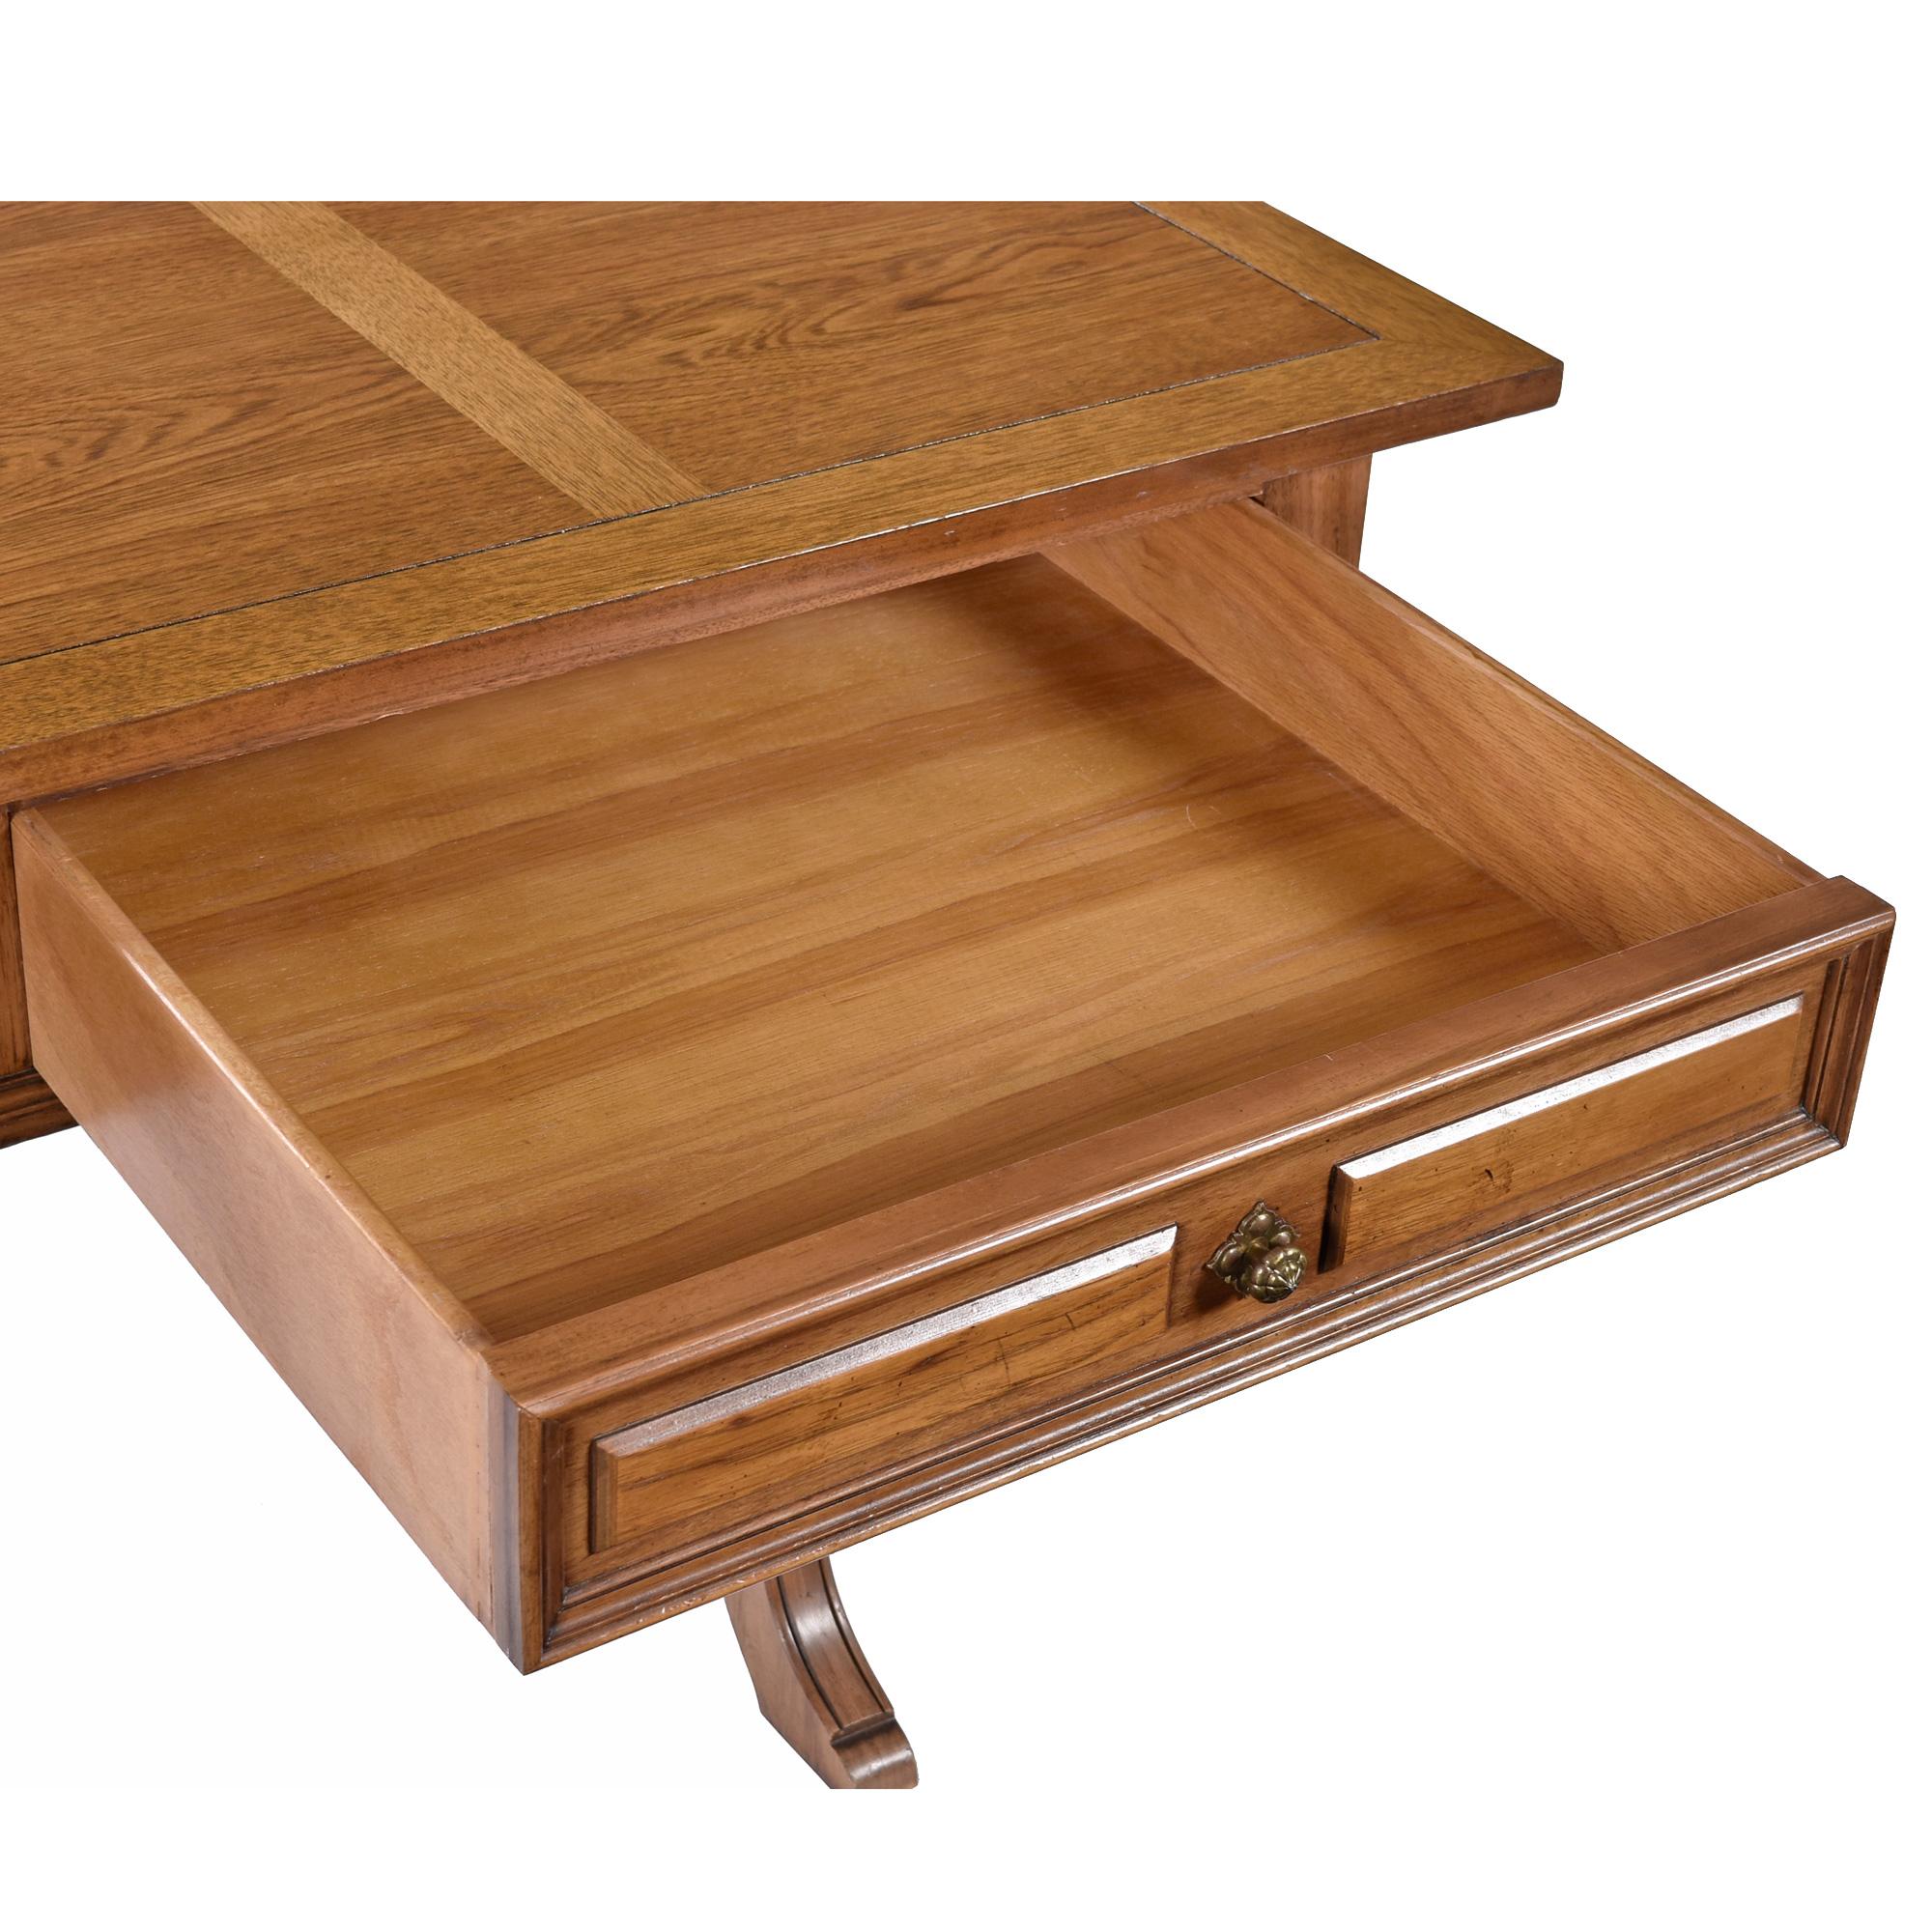 Walnut 1960's English Regency Style Pecan Desk Console by Thomasville For Sale